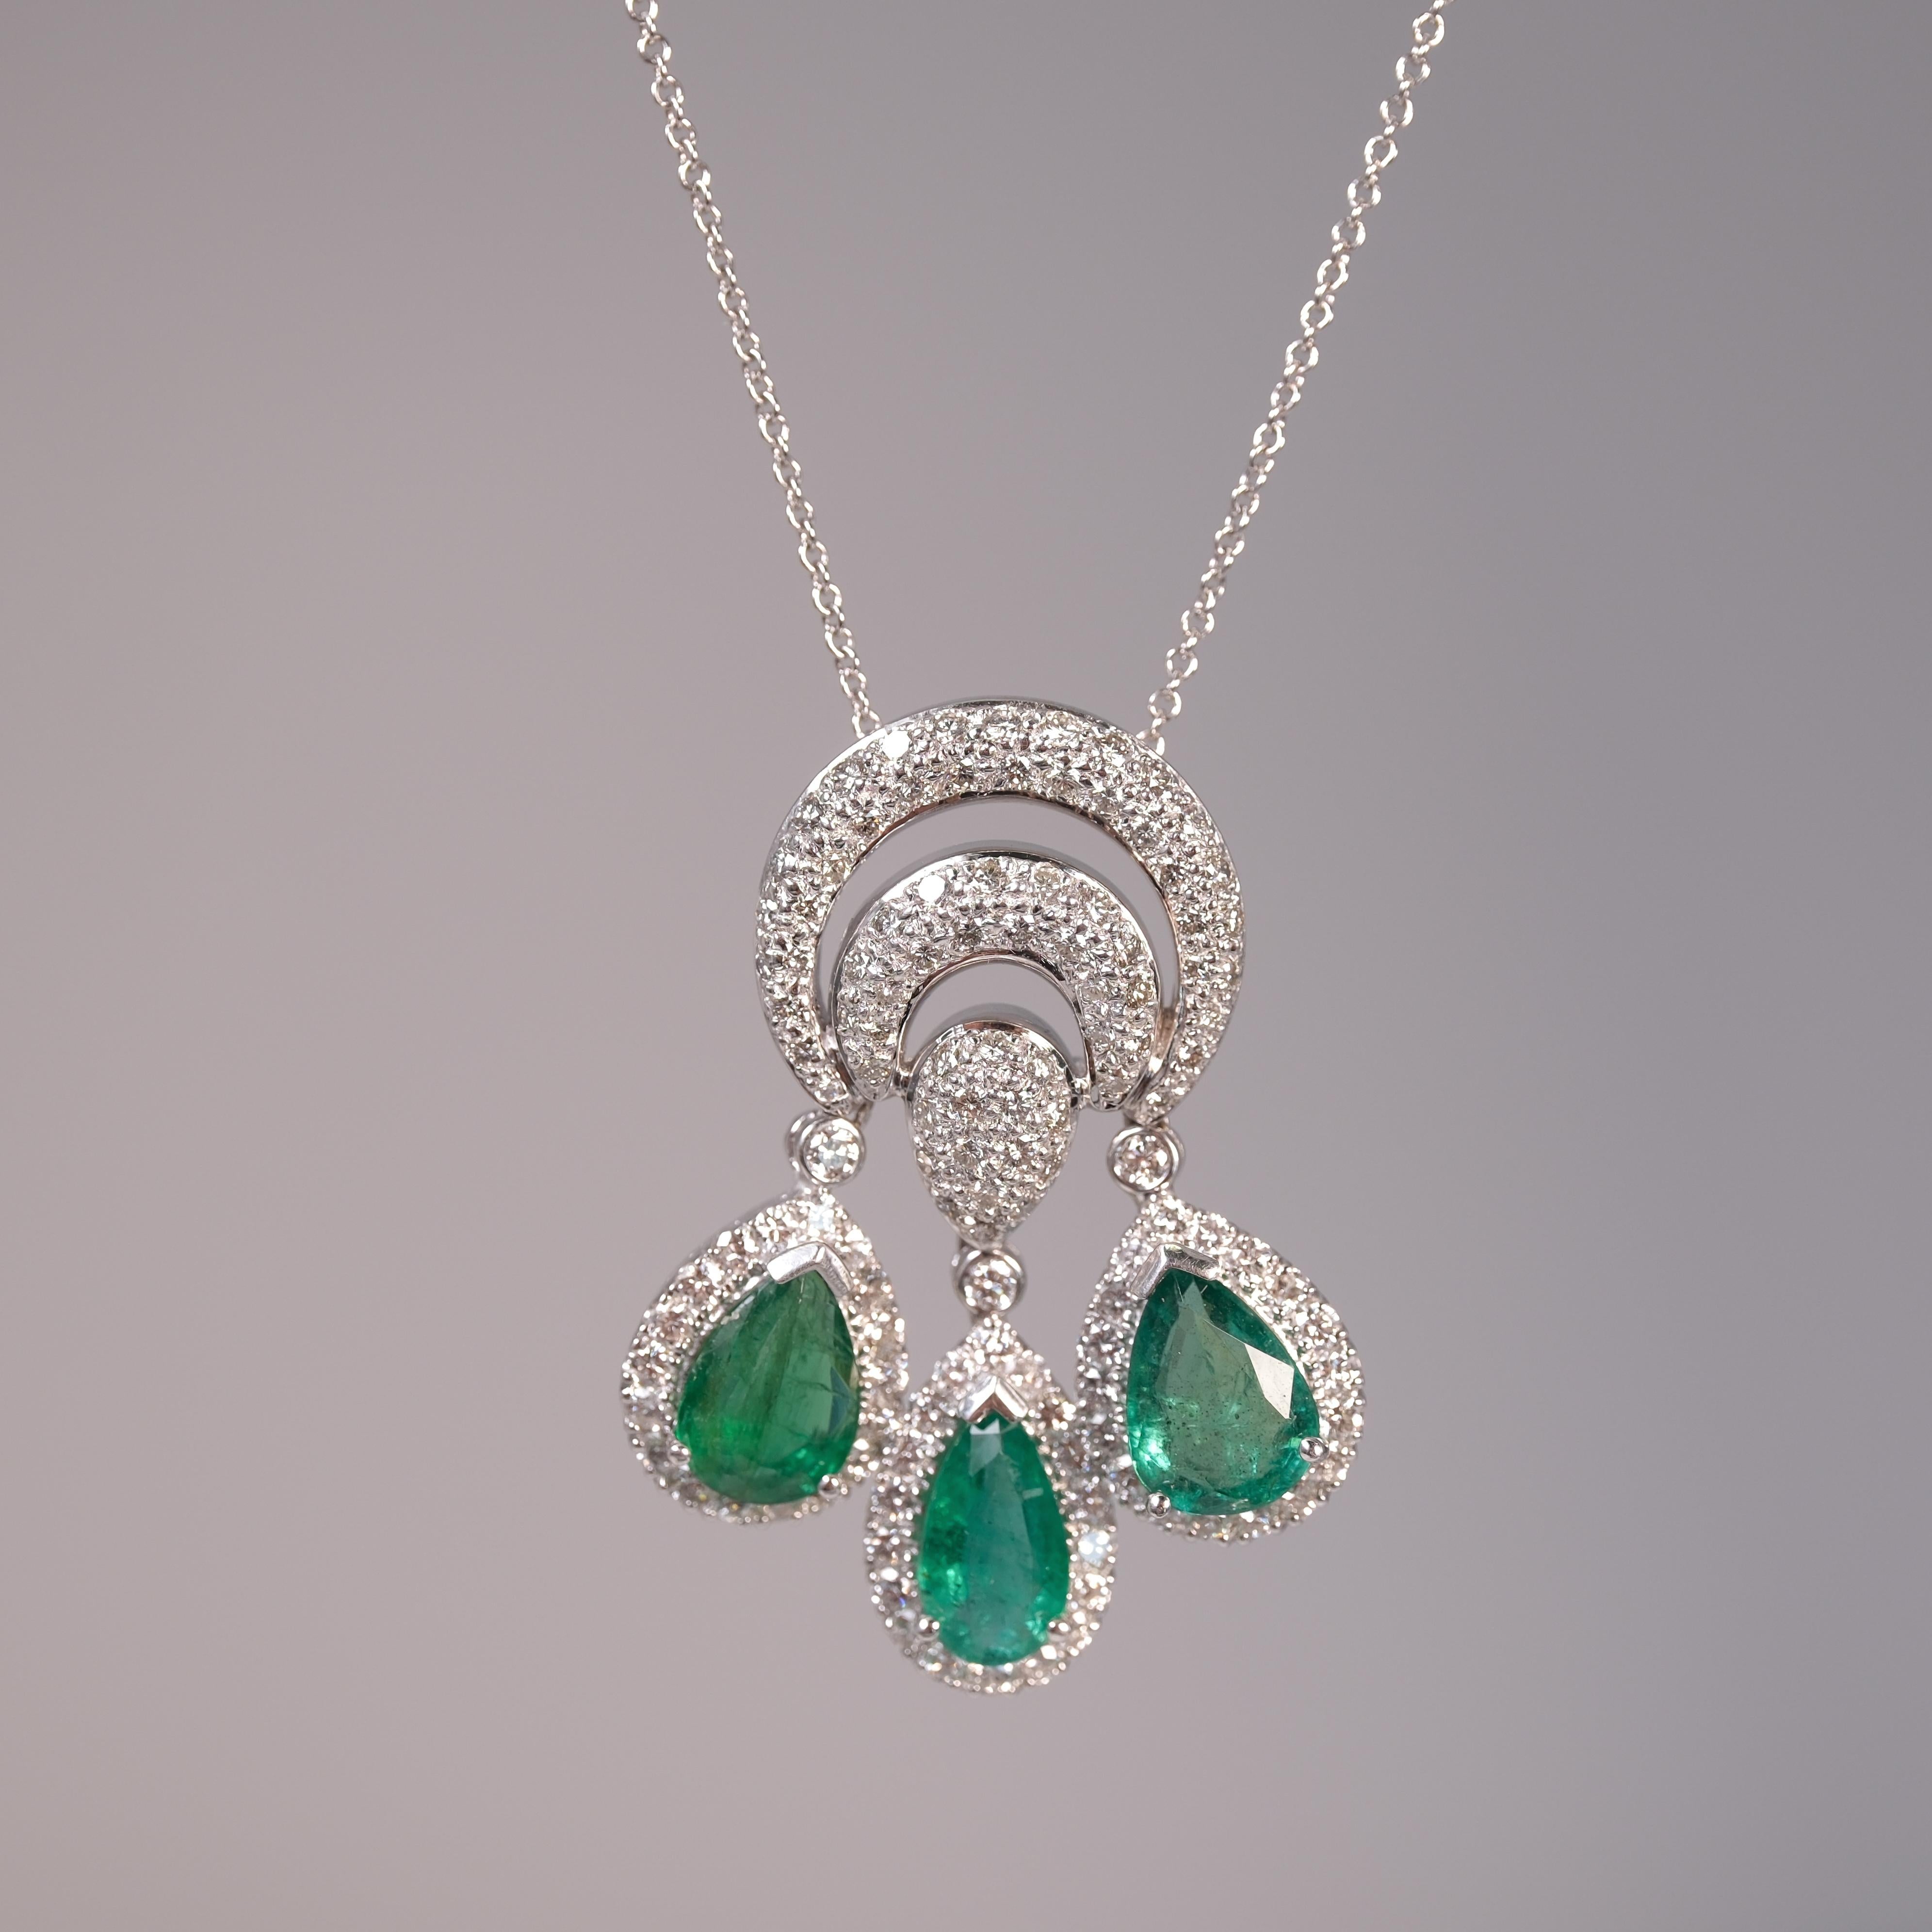 Crafted from 18 karat white gold, this pendant showcases three richly-hued pear cut emeralds, framed by approximately 1.75 carats of round diamonds. A delicate 14 karat chain complements the striking centerpiece, merging elegance with profound